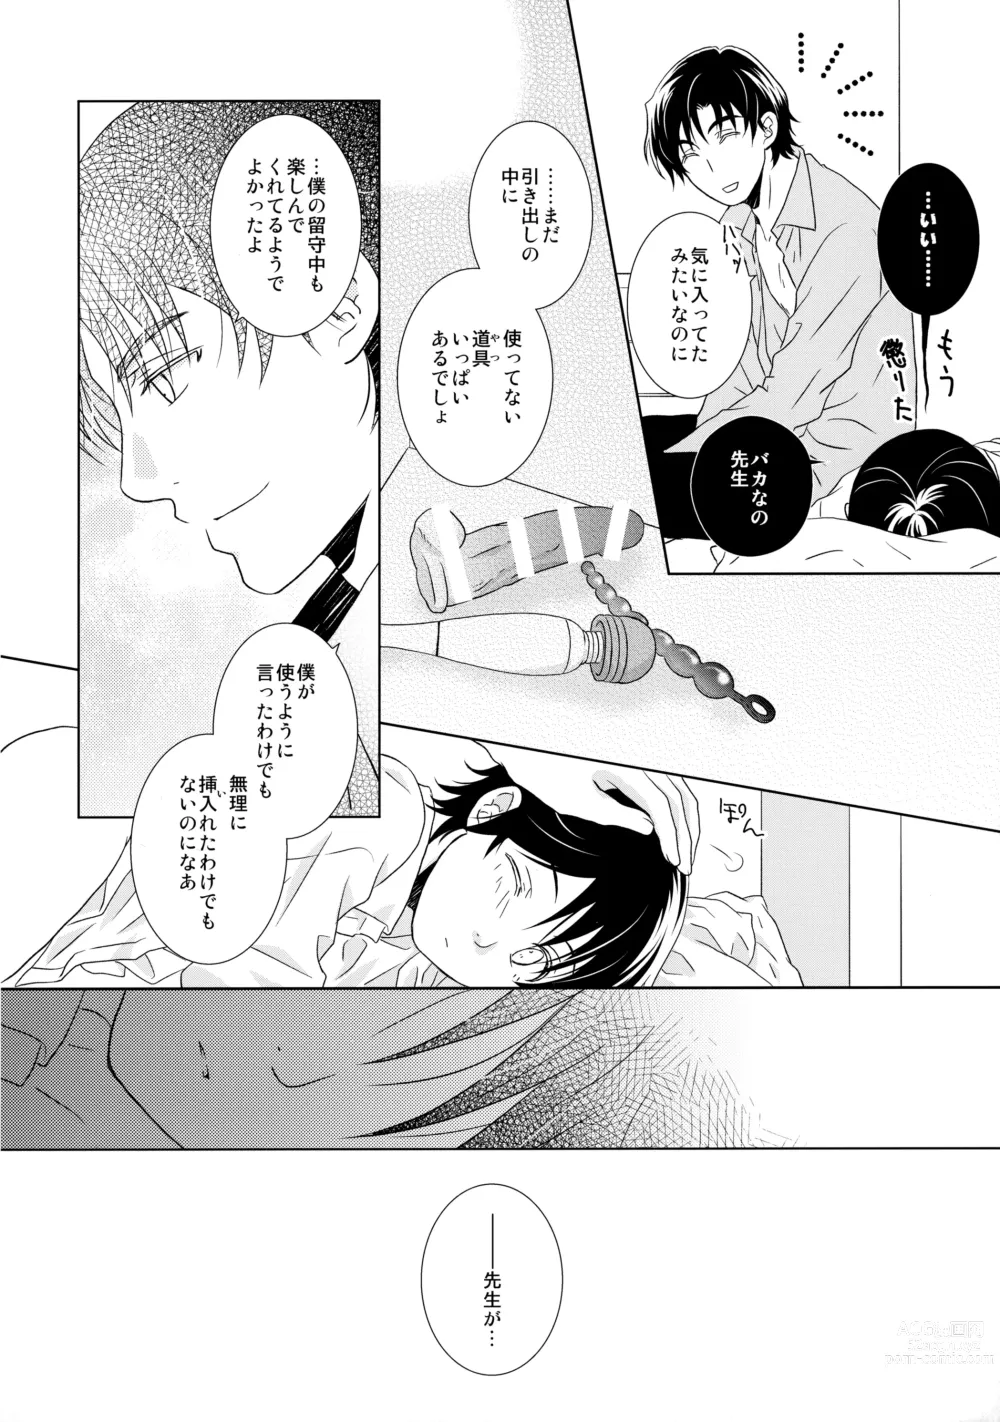 Page 15 of doujinshi Butterfield 8